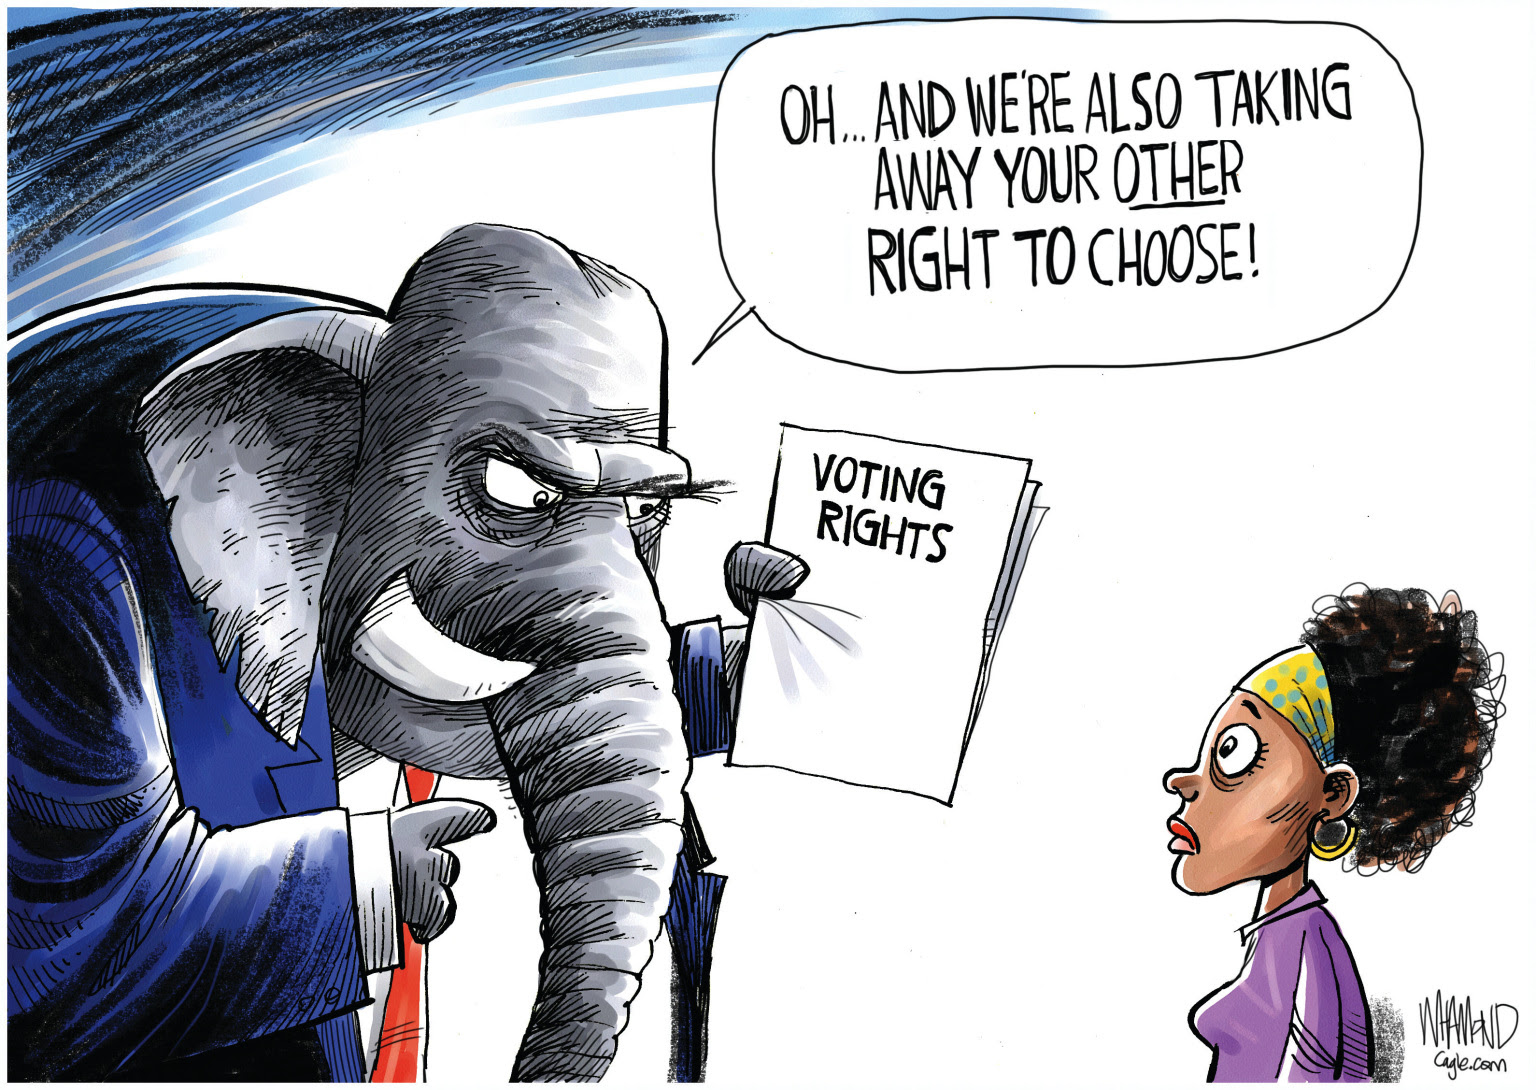 Republicans block a womans right to choose to get an abortion and the right to vote. No exceptions for rape or incest.